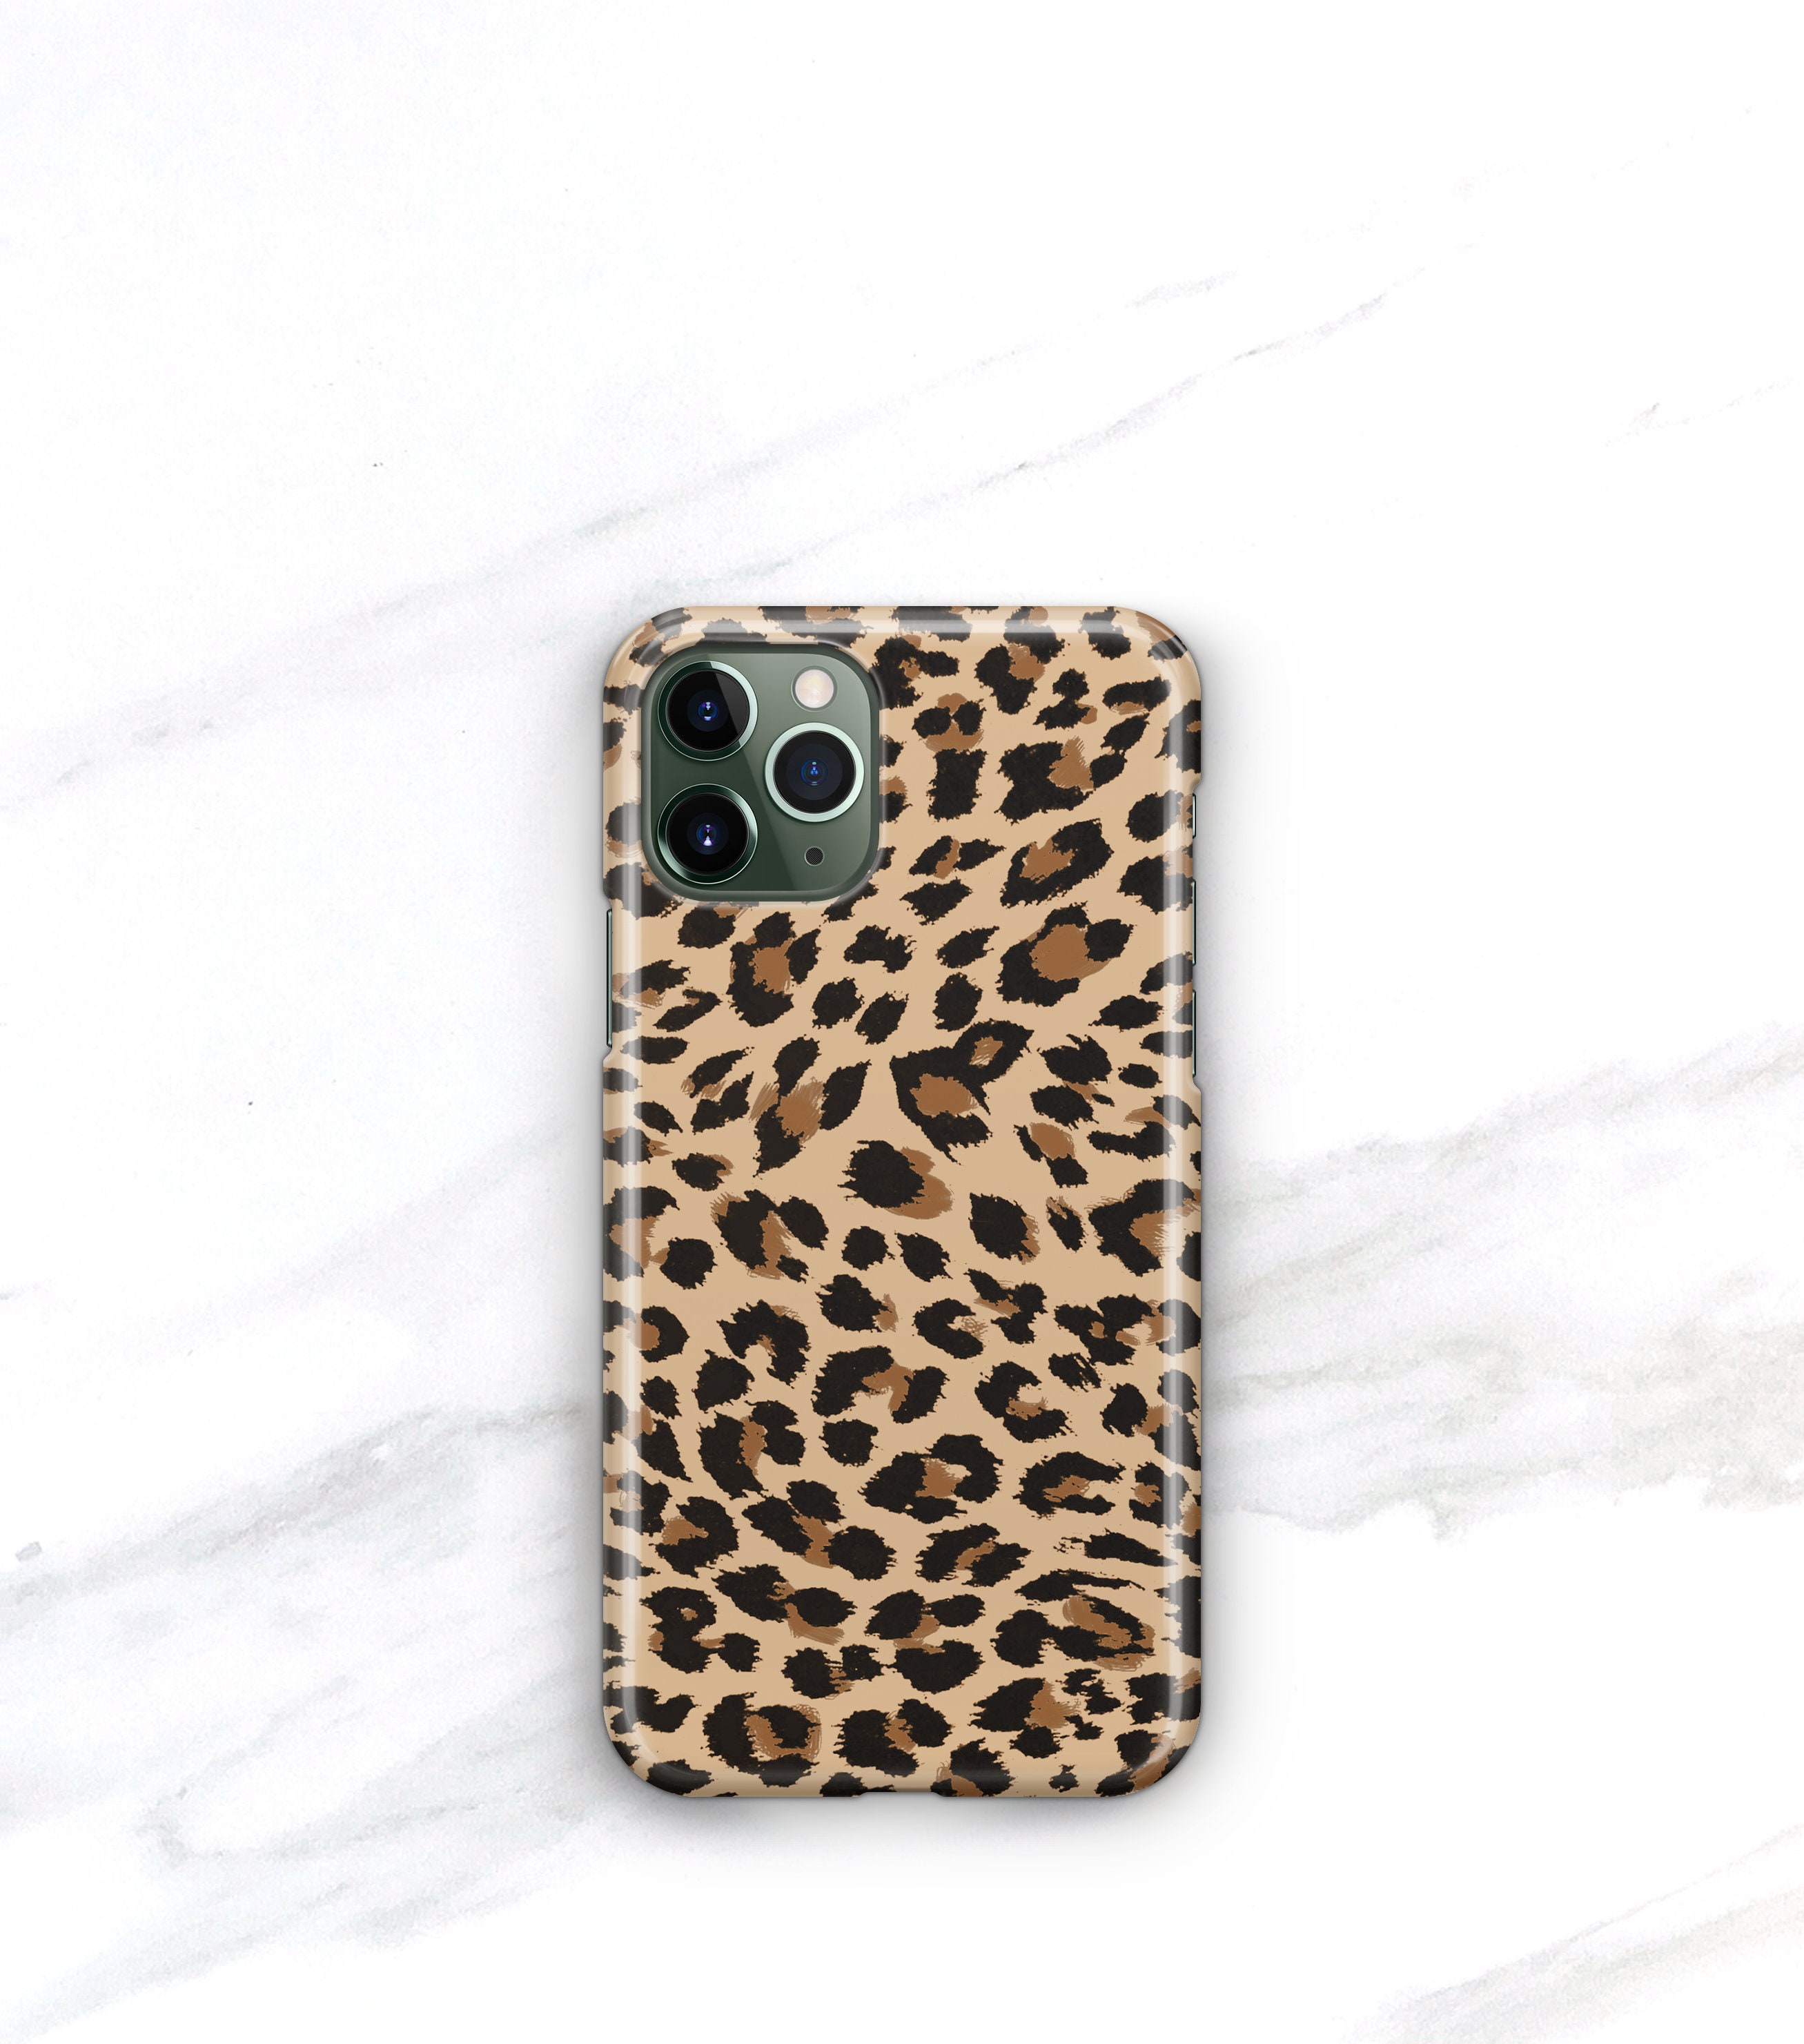  Compatible with iPhone 13 Pro Max case Luxury Leopard